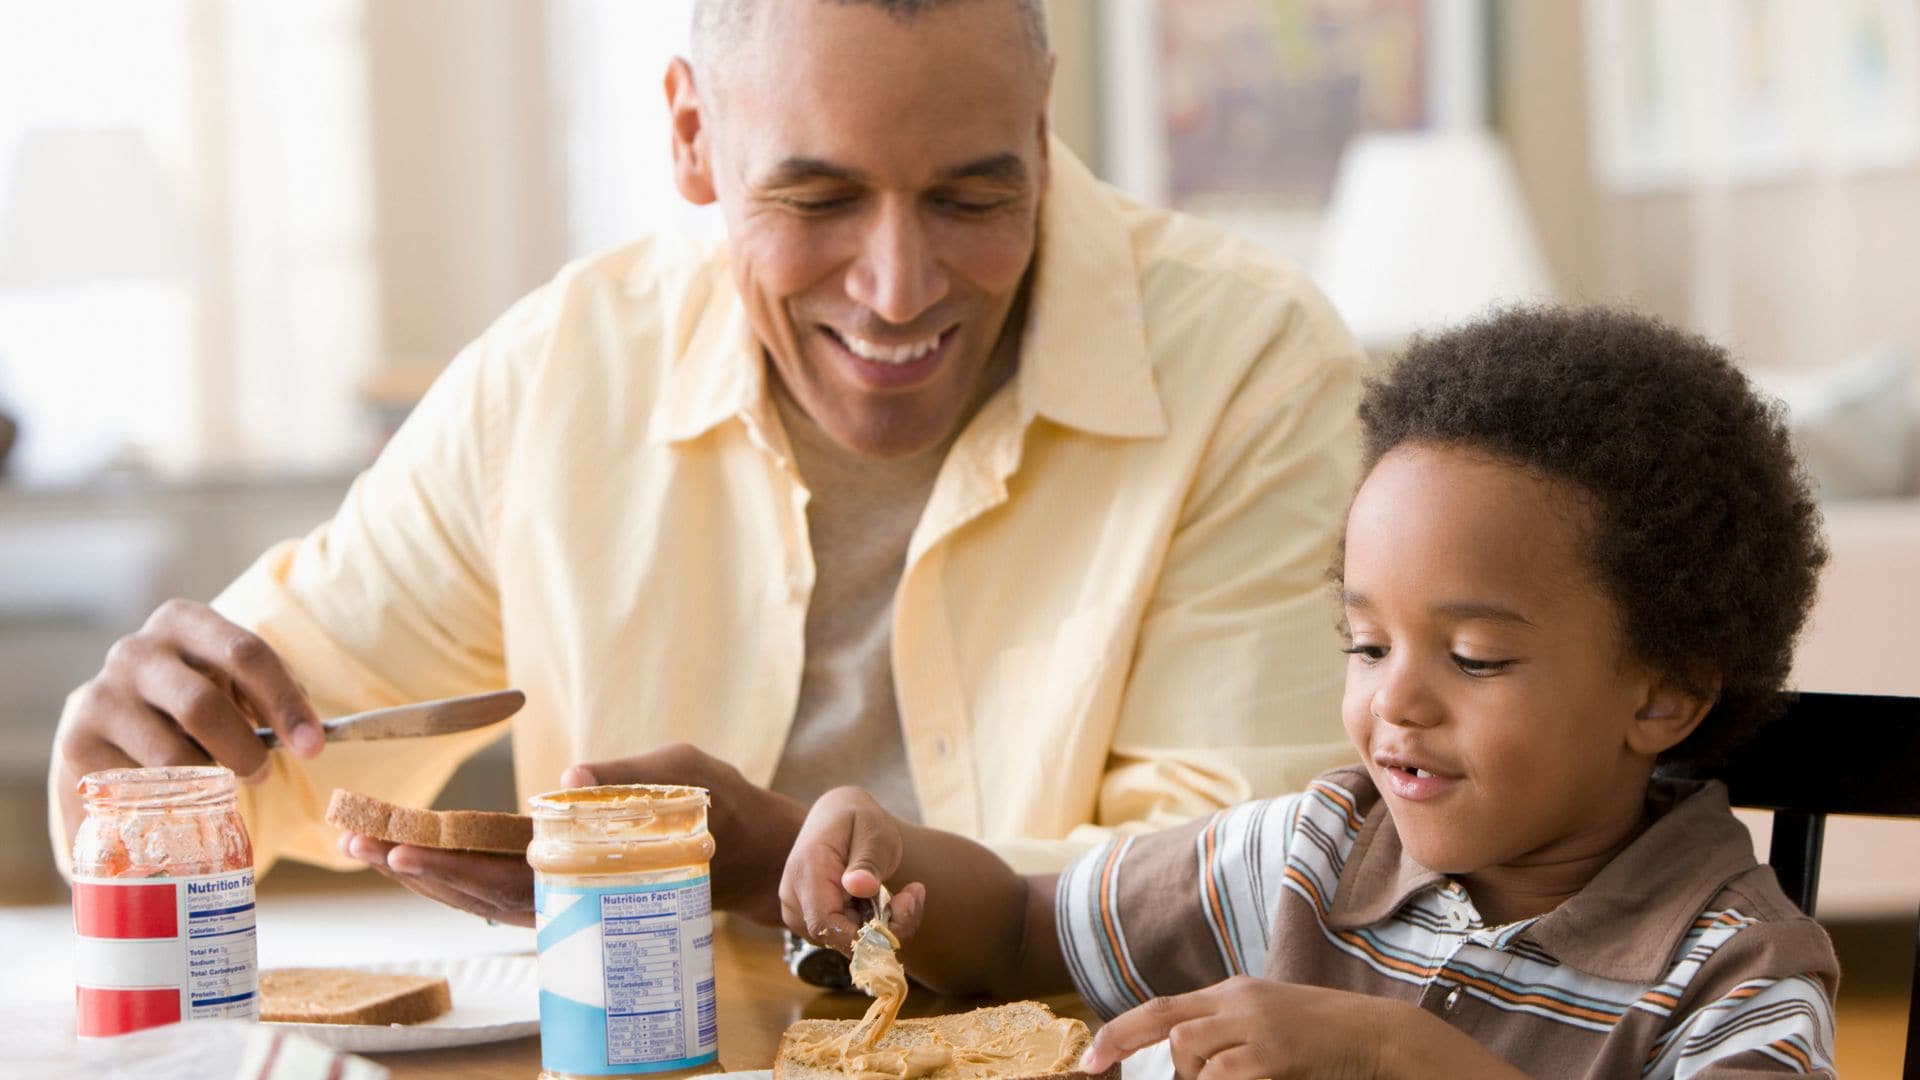 New study finds smooth peanut butter reduces allergy risk in infants